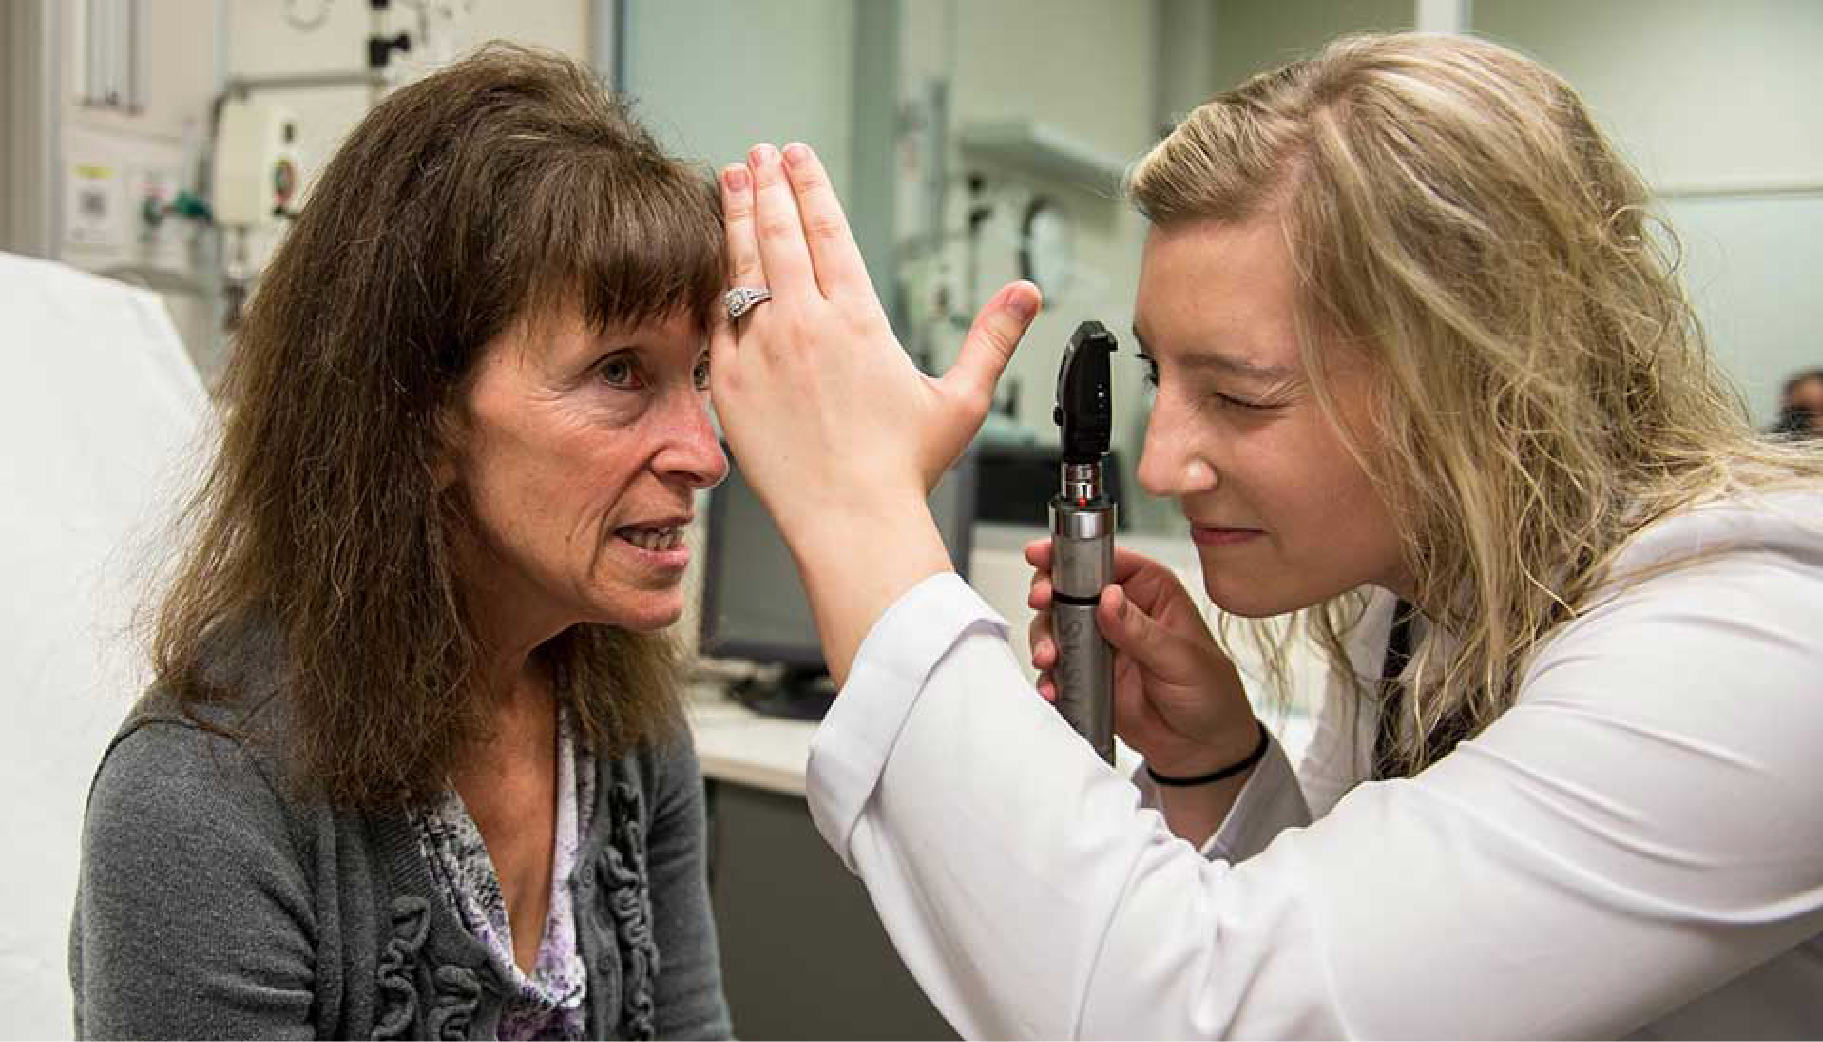 A nursing student ear being examined